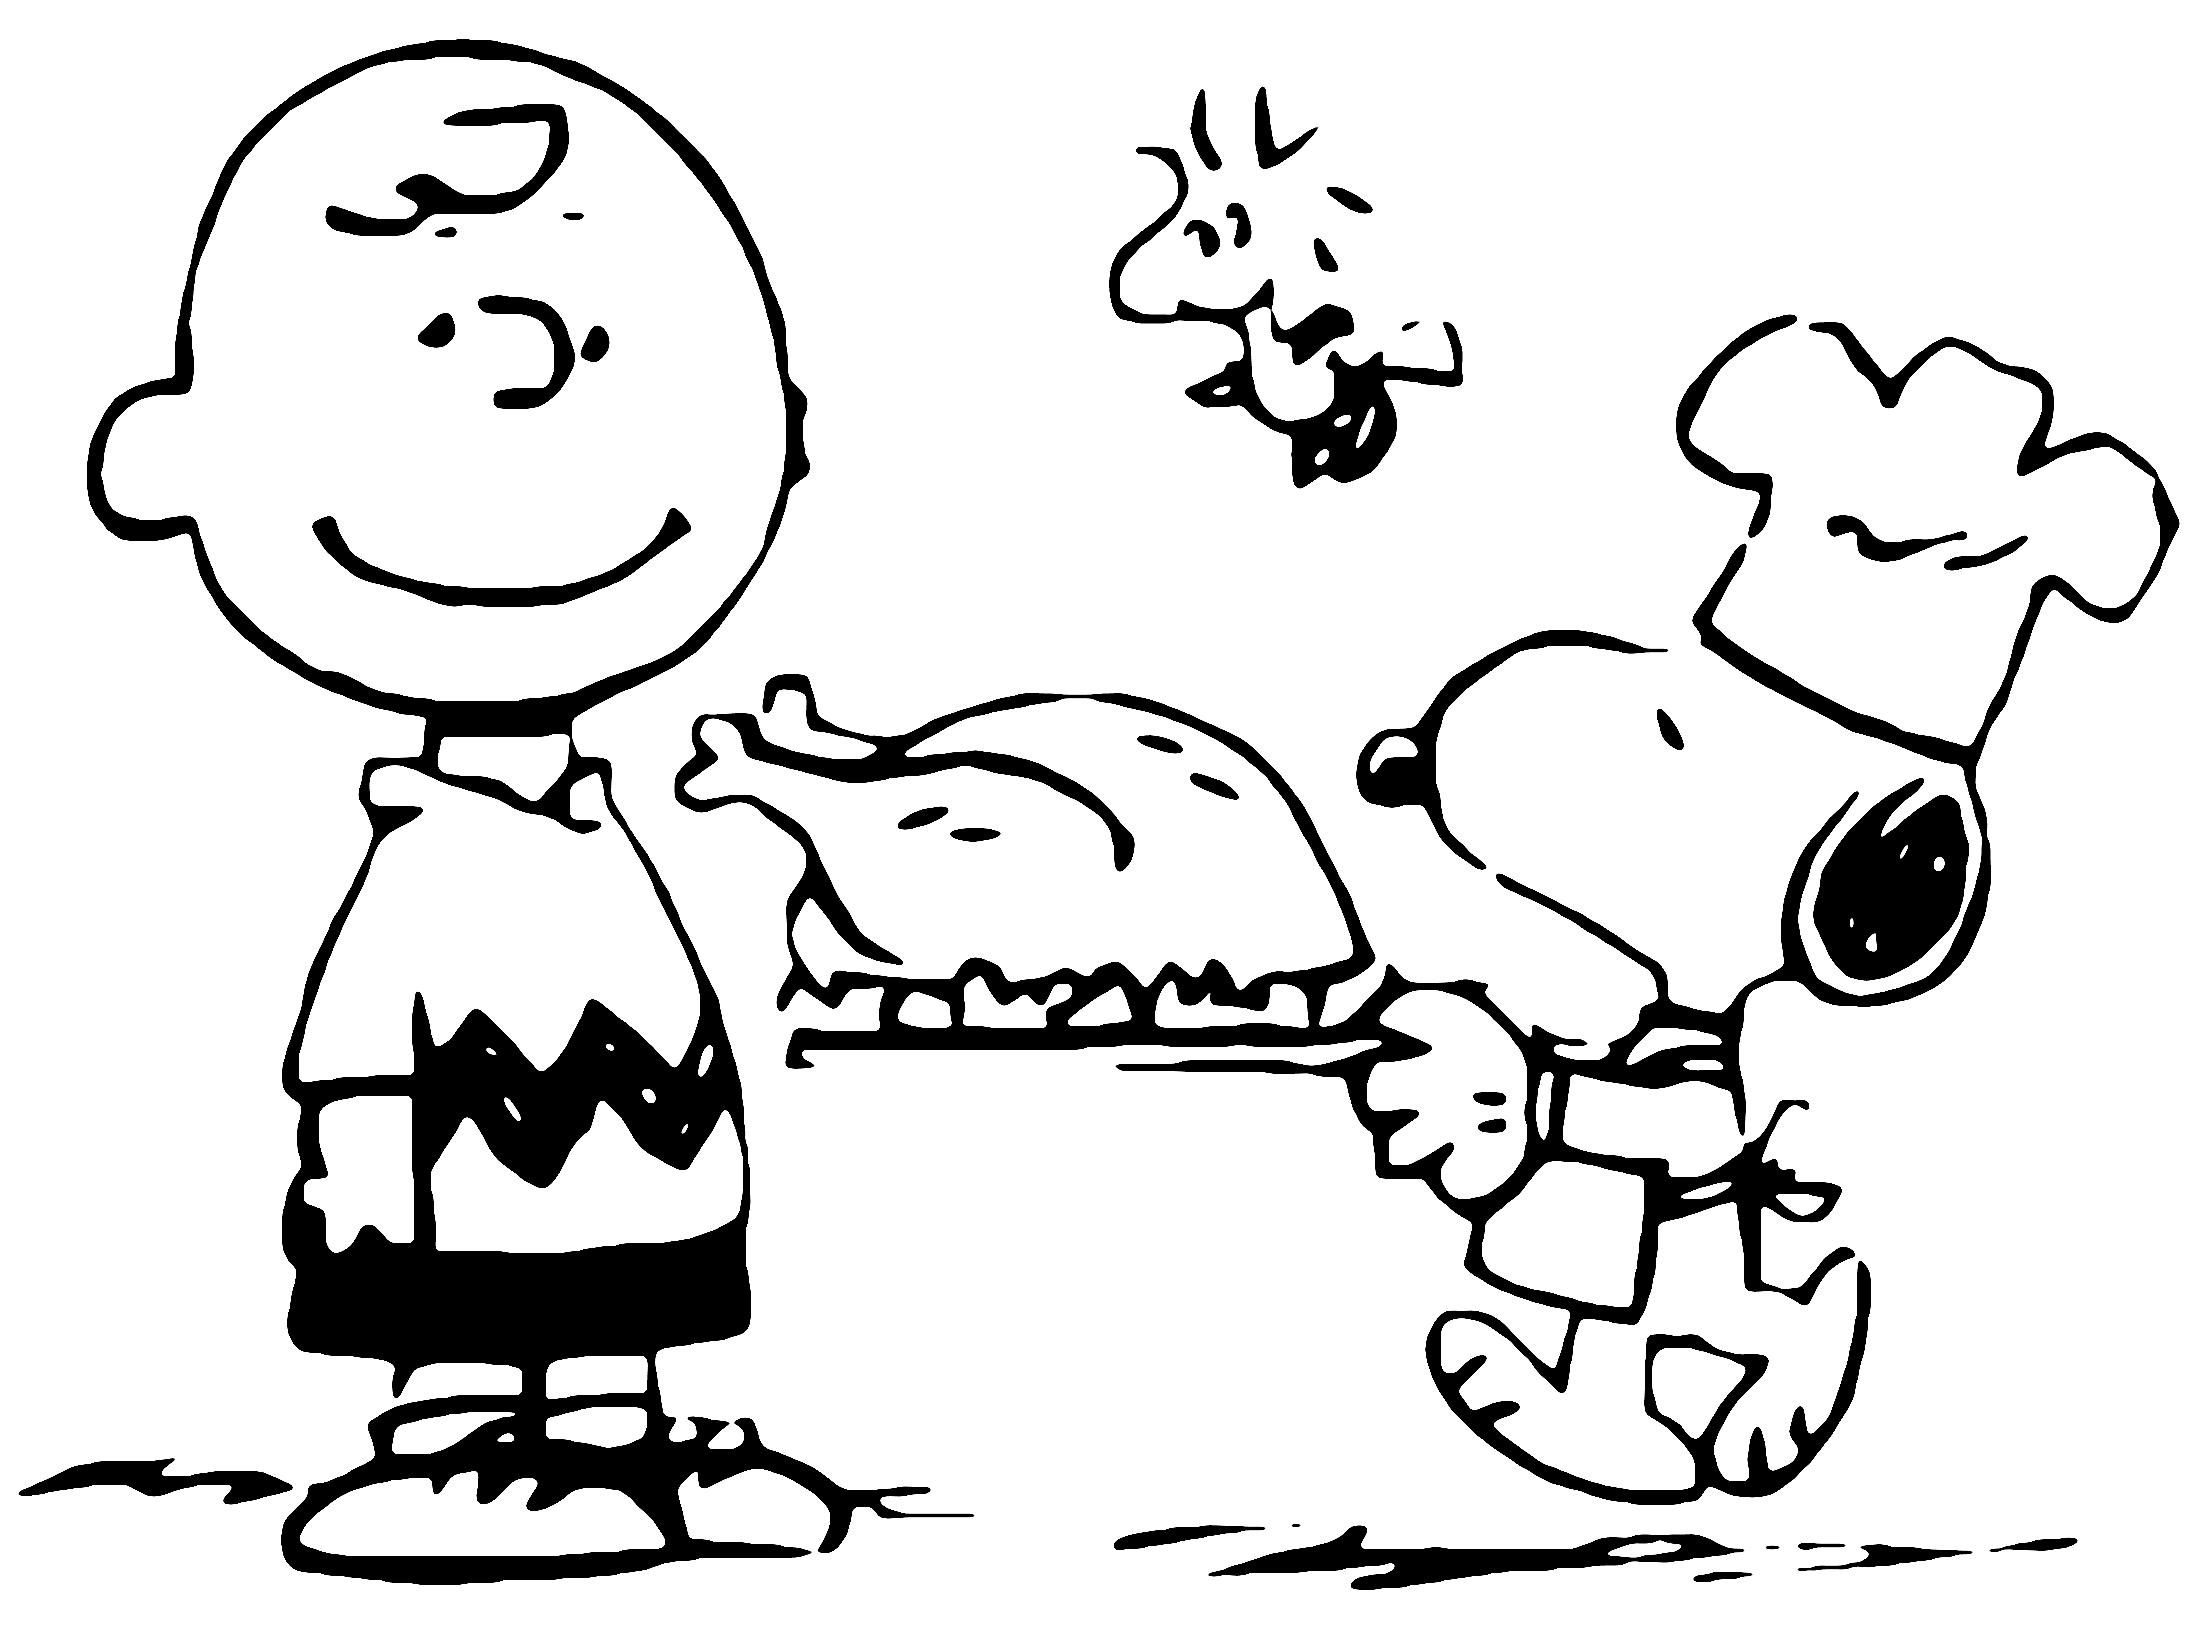 Printable Snoopy Coloring Pages.